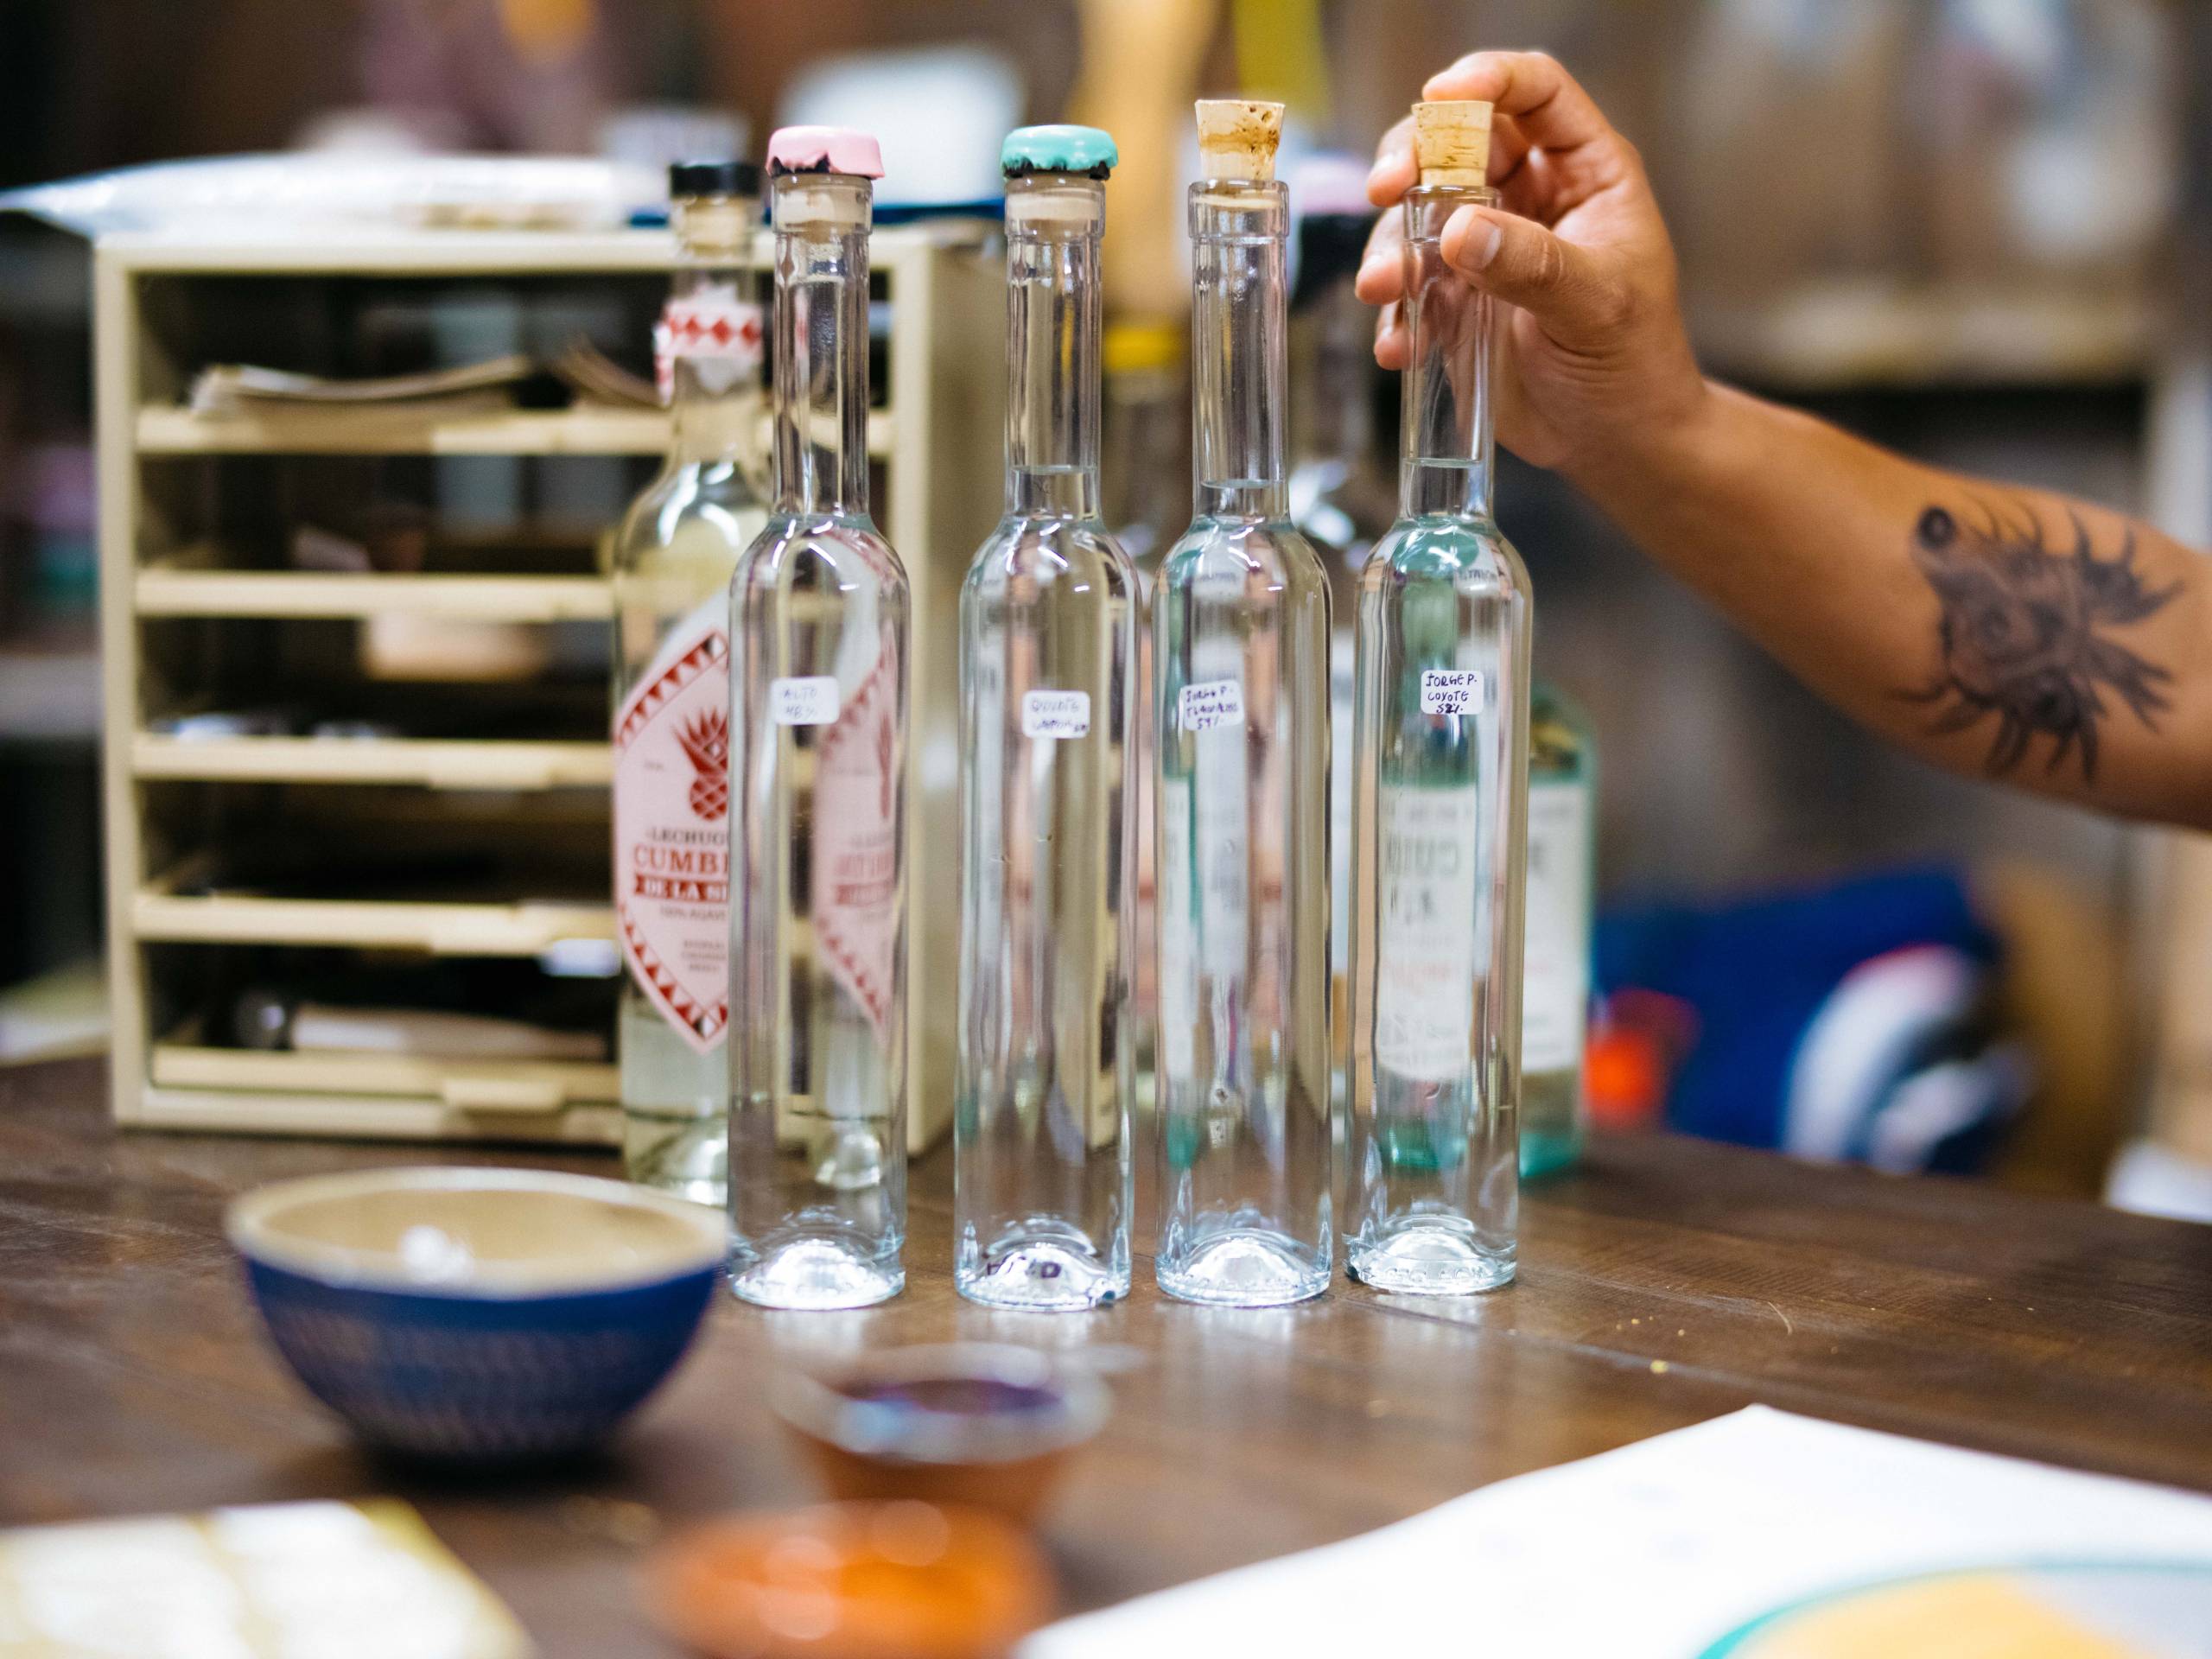 four bottles of mezcal from Mexico displayed on a table